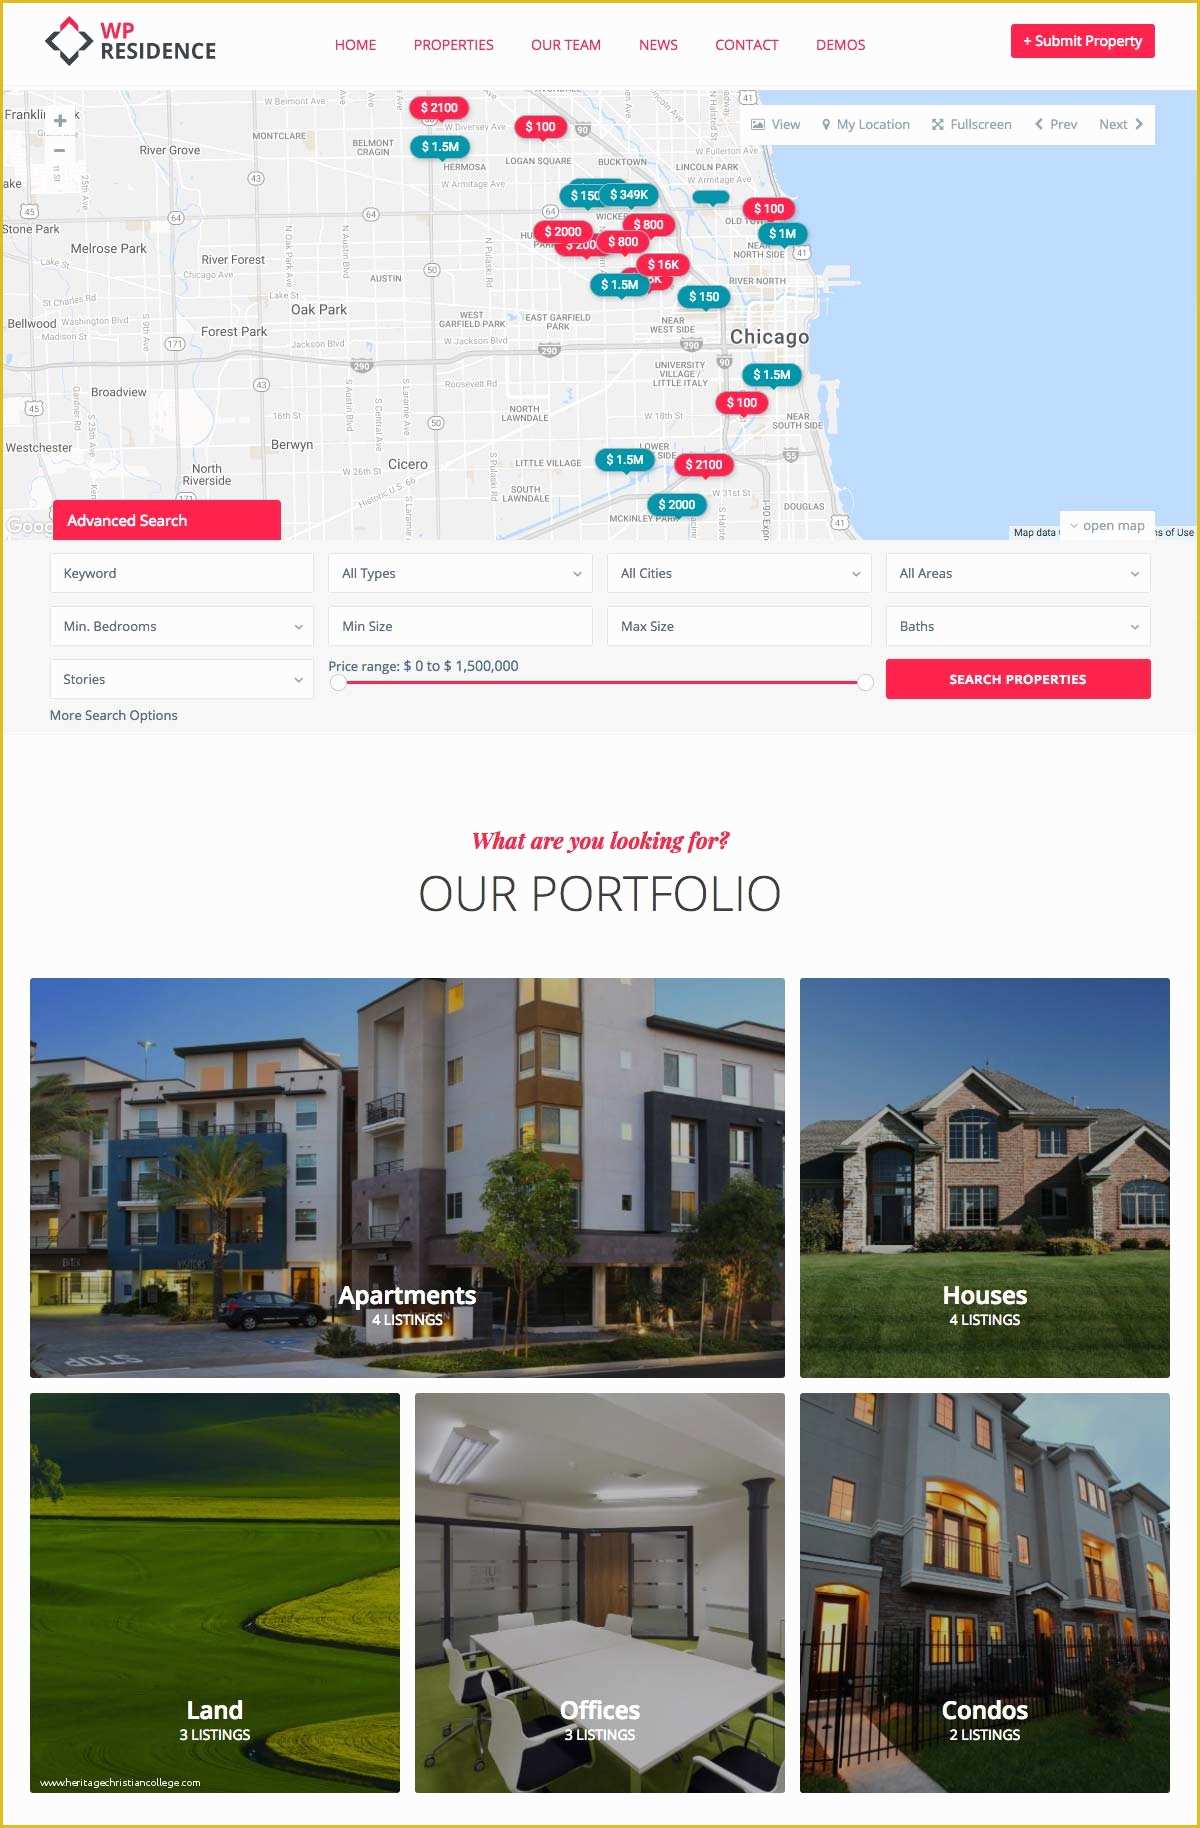 Real Estate Landing Page Template Free Download Of 10 Best Wordpress Landing Page Templates In 2018